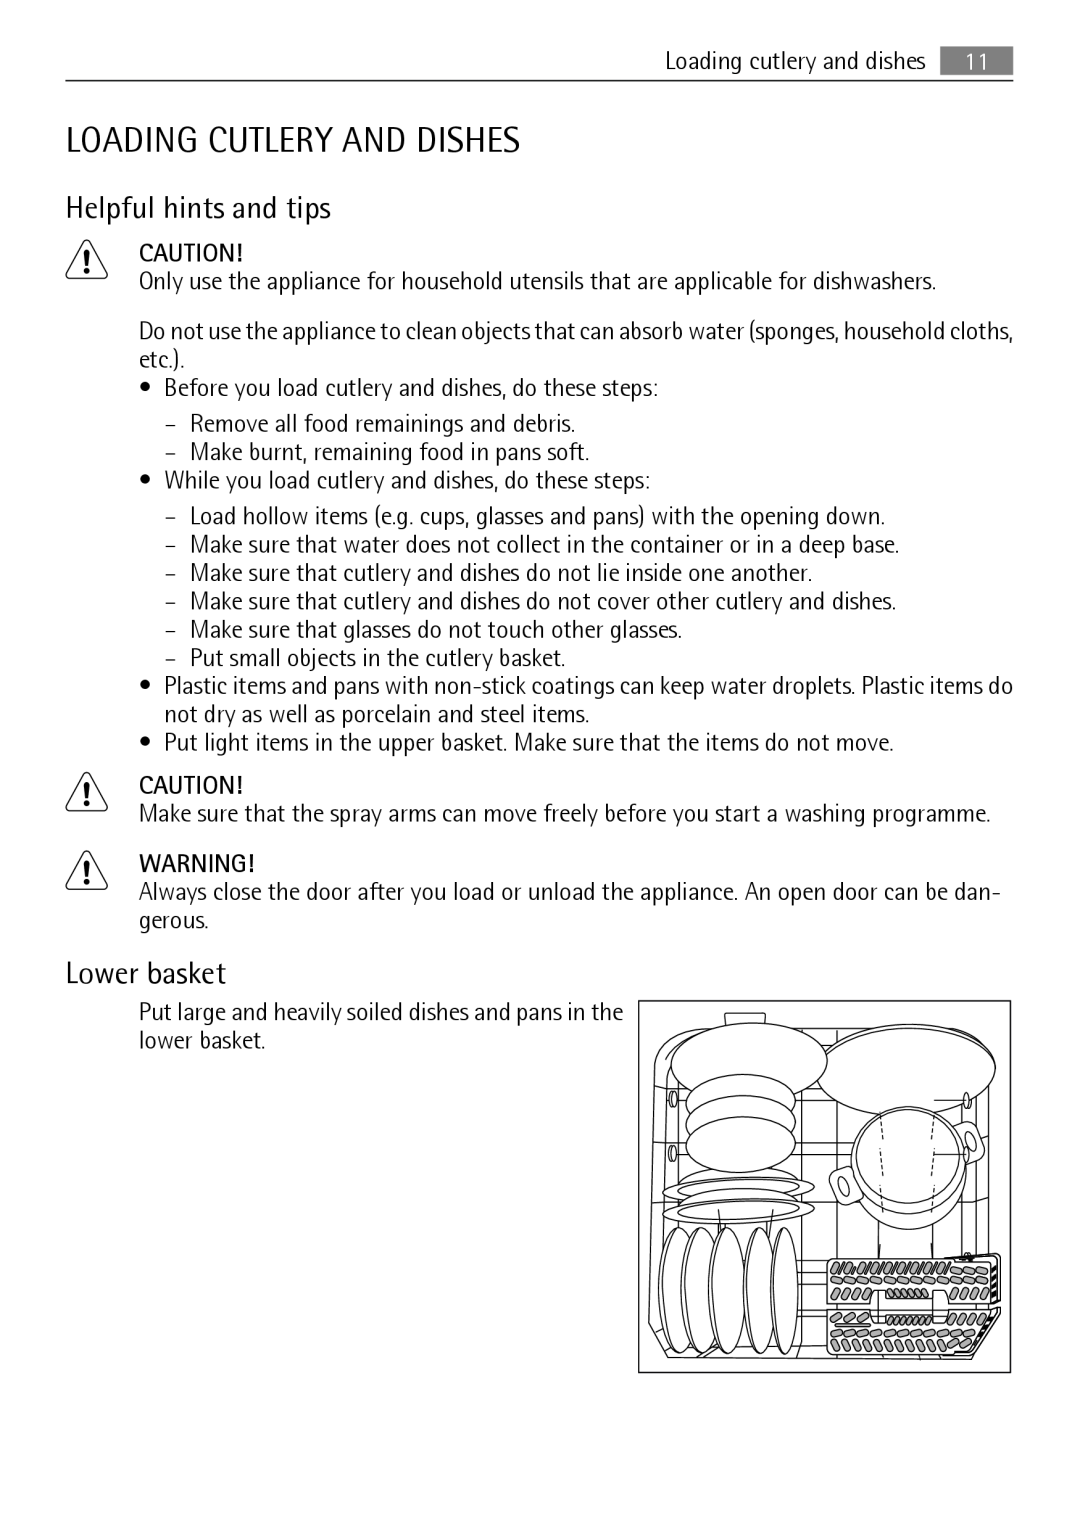 AEG 45003 user manual Loading Cutlery And Dishes, Helpful hints and tips, Lower basket 